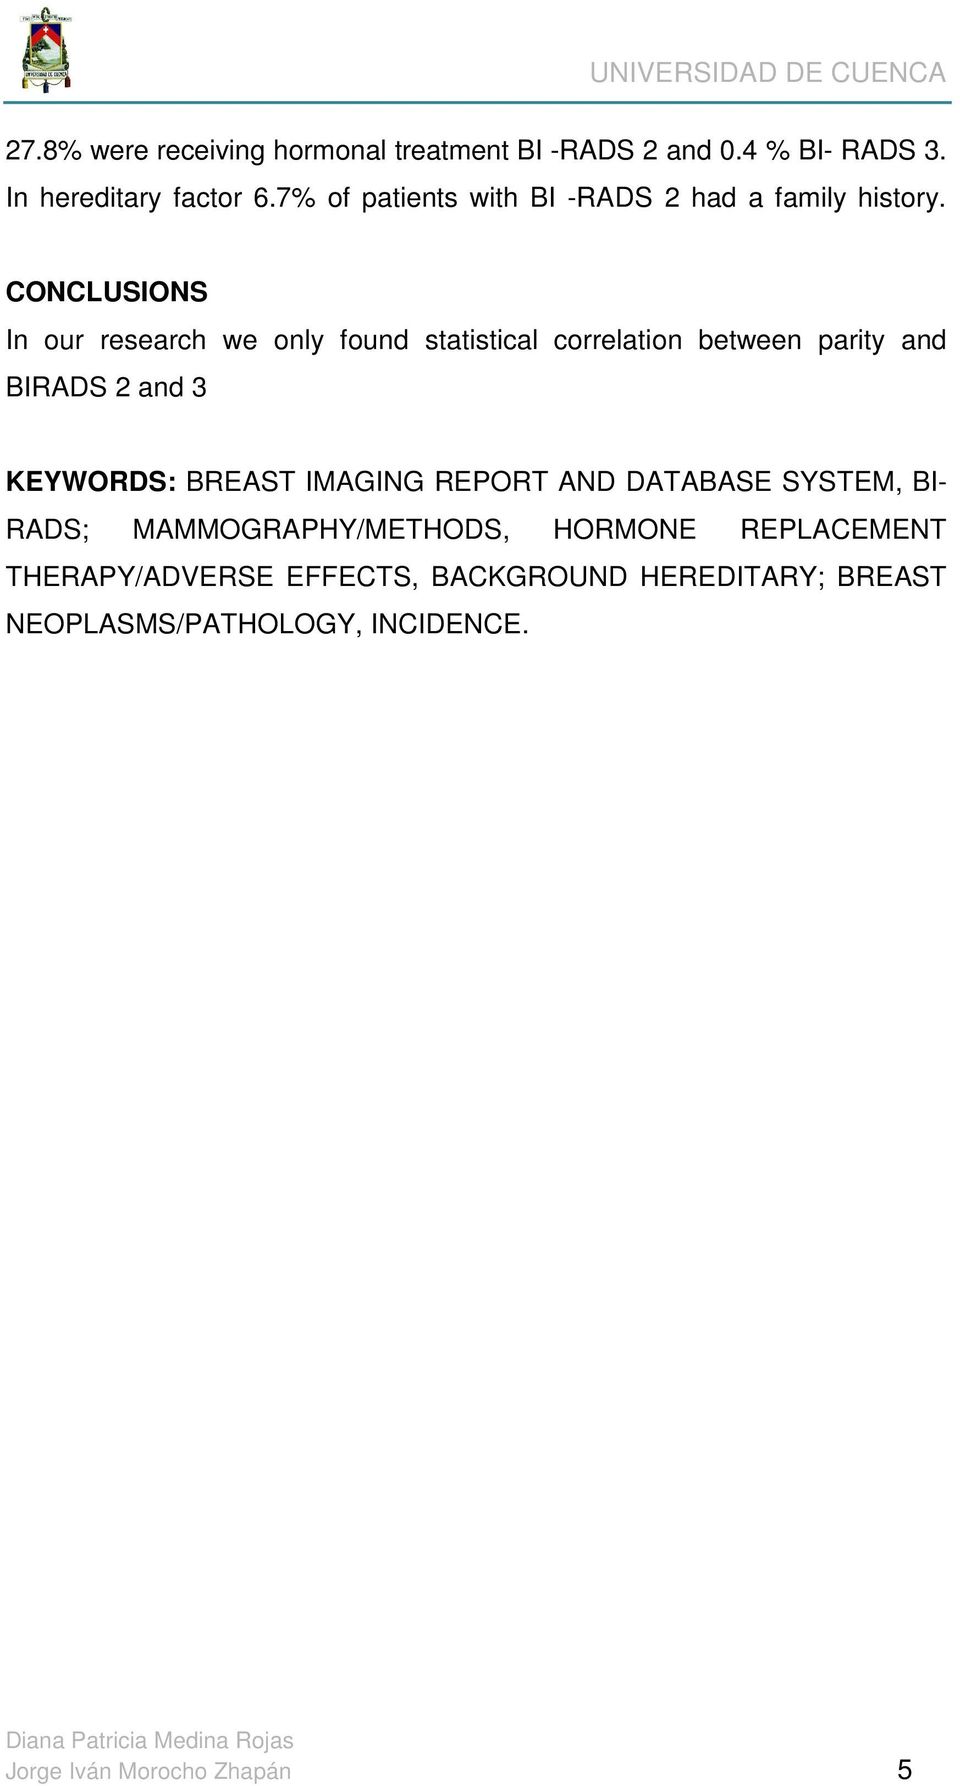 CONCLUSIONS In our research we only found statistical correlation between parity and BIRADS 2 and 3 KEYWORDS: BREAST